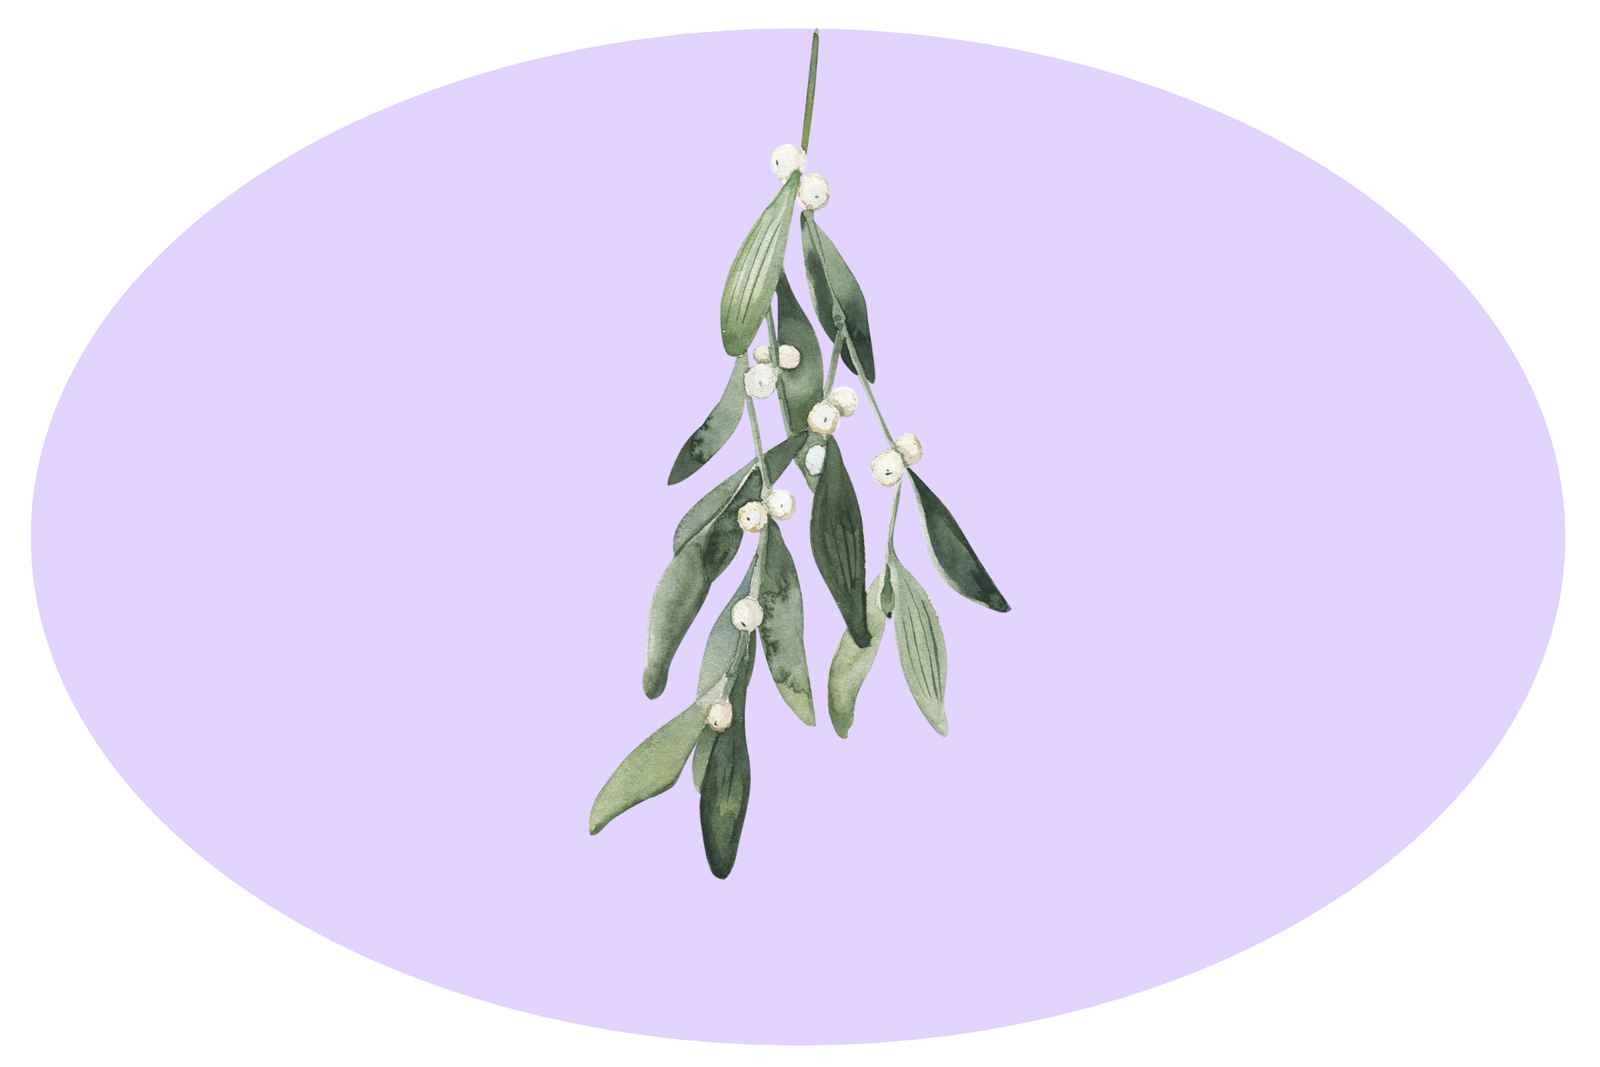 Graphic of green mistletoe on a purple background.